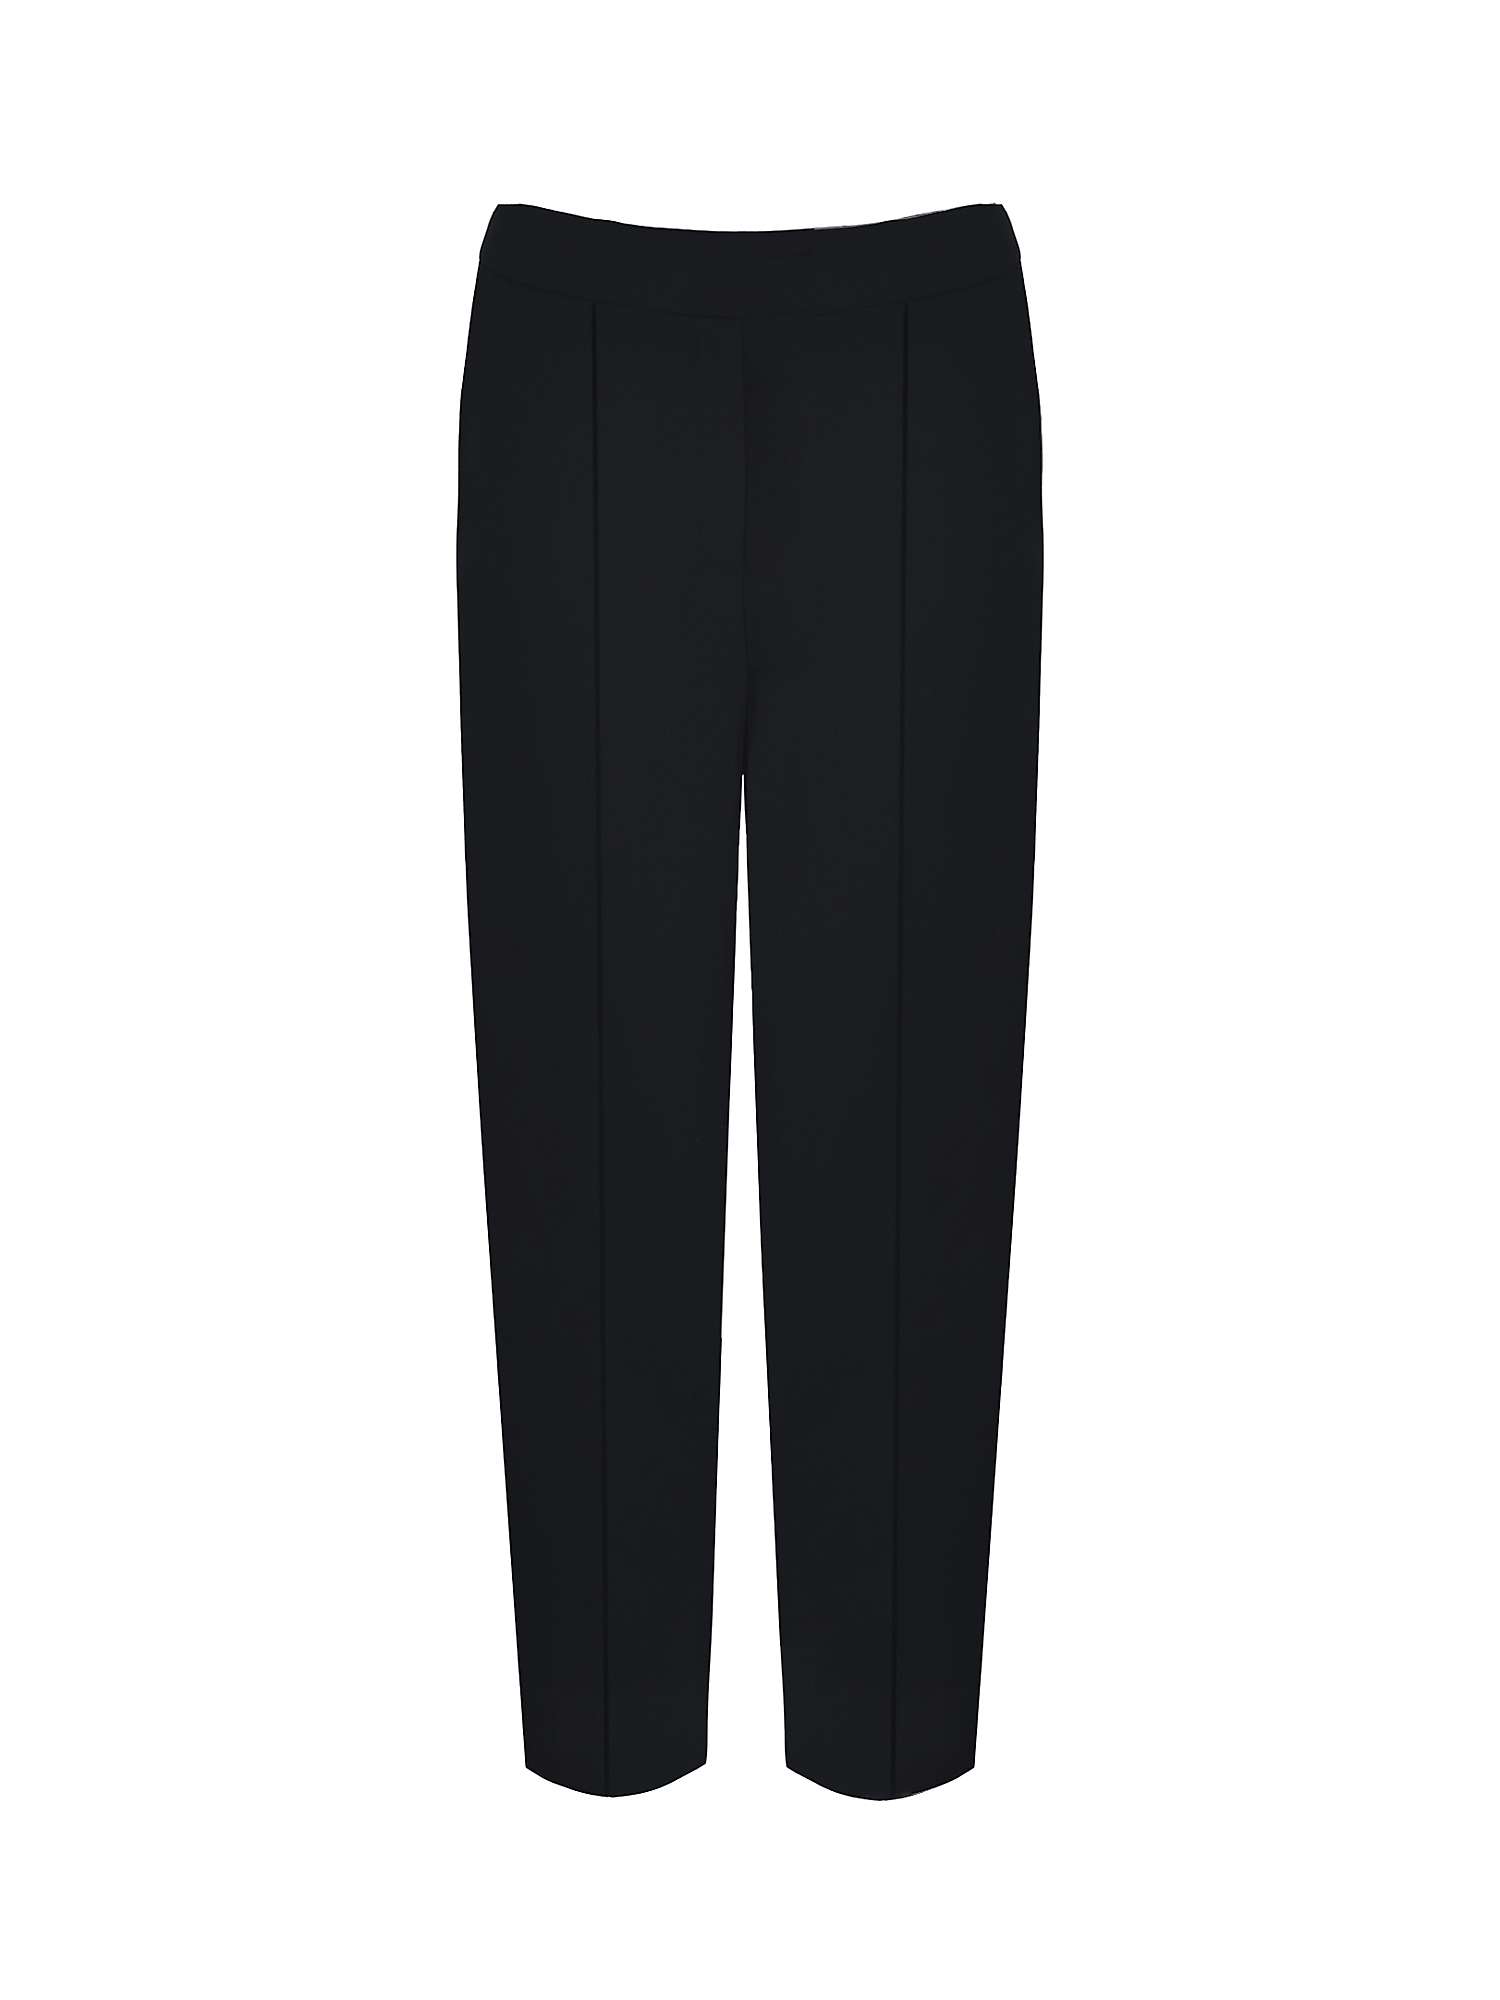 Buy Live Unlimited Curve Petite Stretch Tapered Trousers, Black Online at johnlewis.com